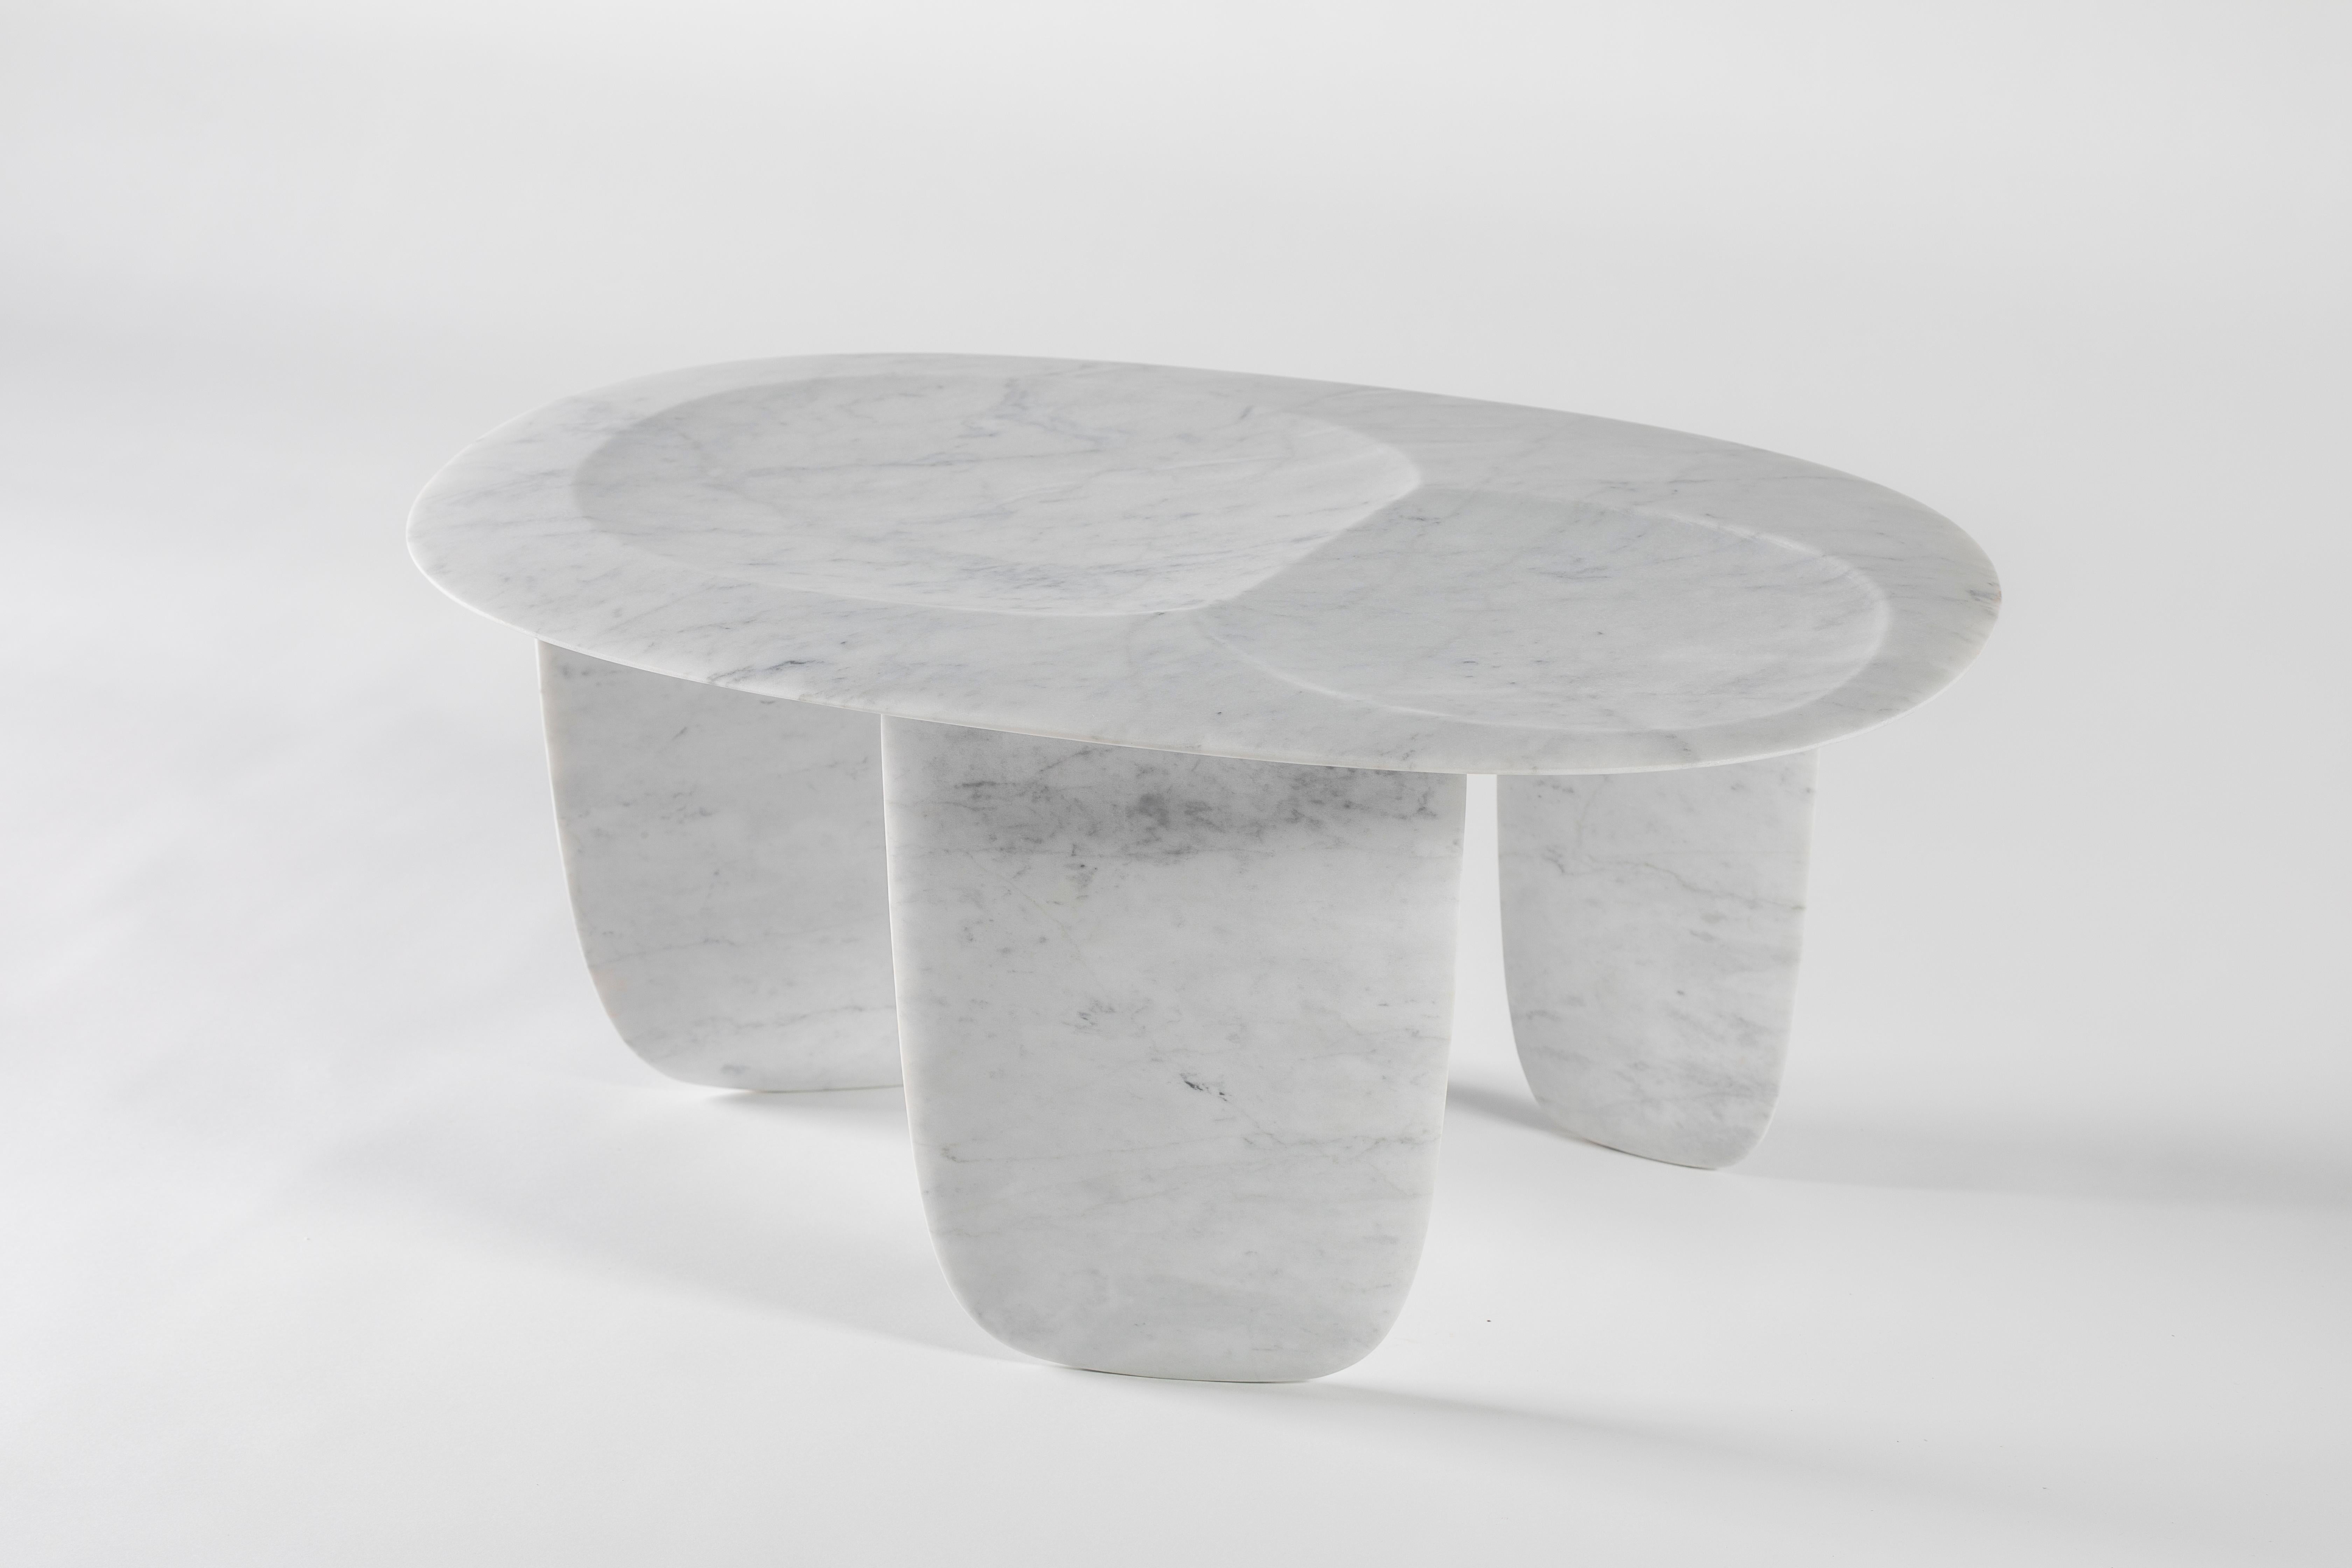 Carved Lithea / Sesi B Coffee Table Designed by Martinelli Venezia Studio Marble White For Sale